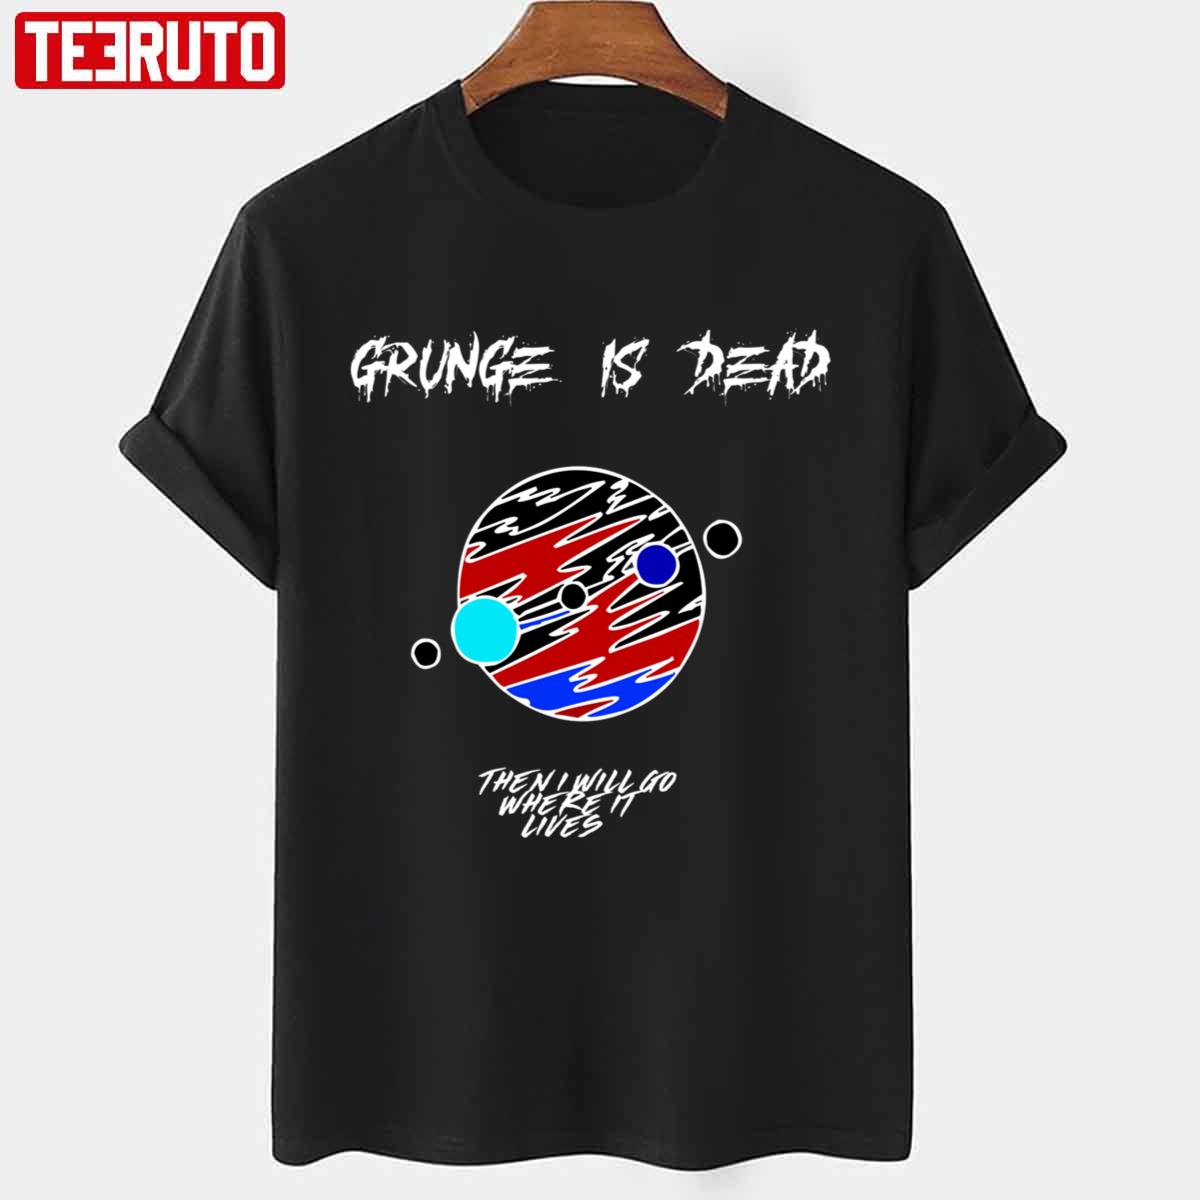 Grunge Is Dead Then I Will Go Where It Lives Unisex T-Shirt